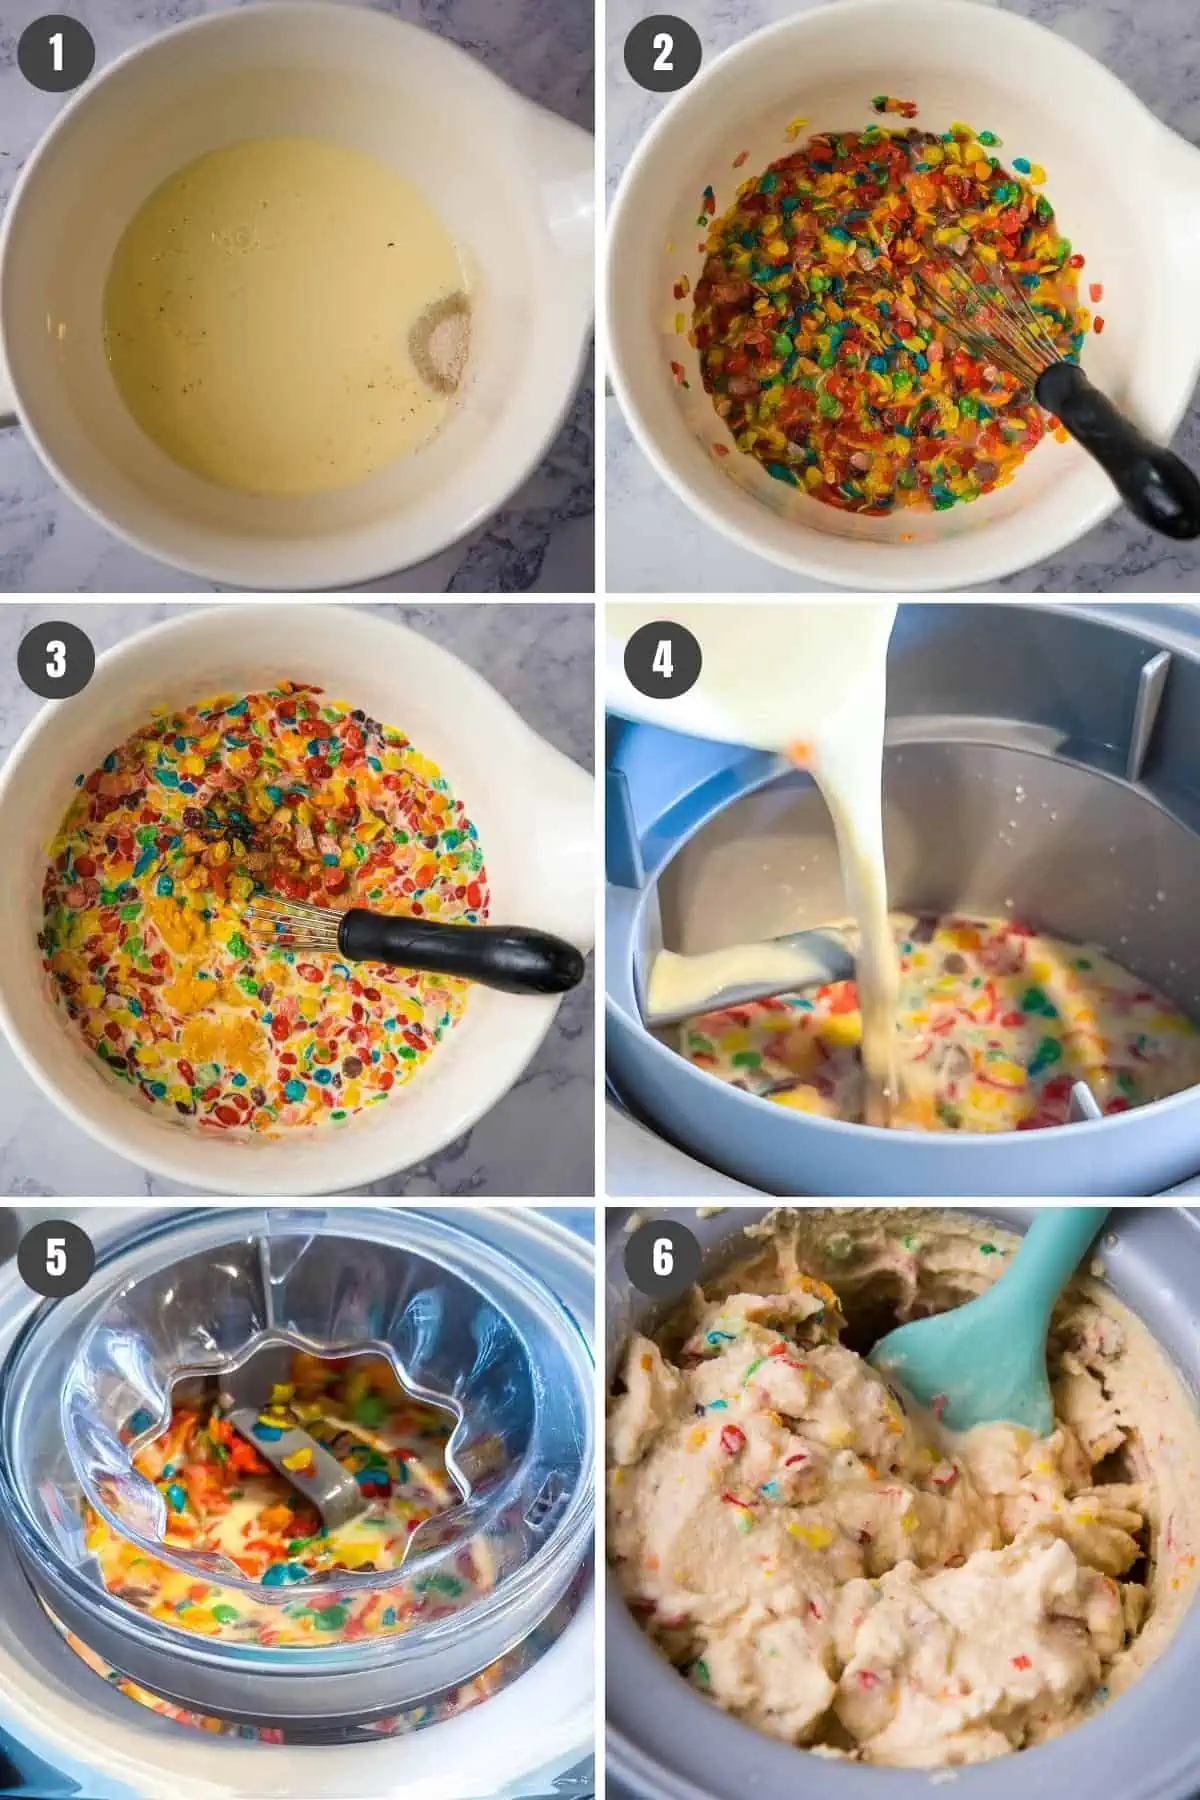 steps for how to make Fruity Pebbles ice cream, including mixing ingredients in large white mixing bowl, pouring into ice cream canister, and freezing in ice cream maker